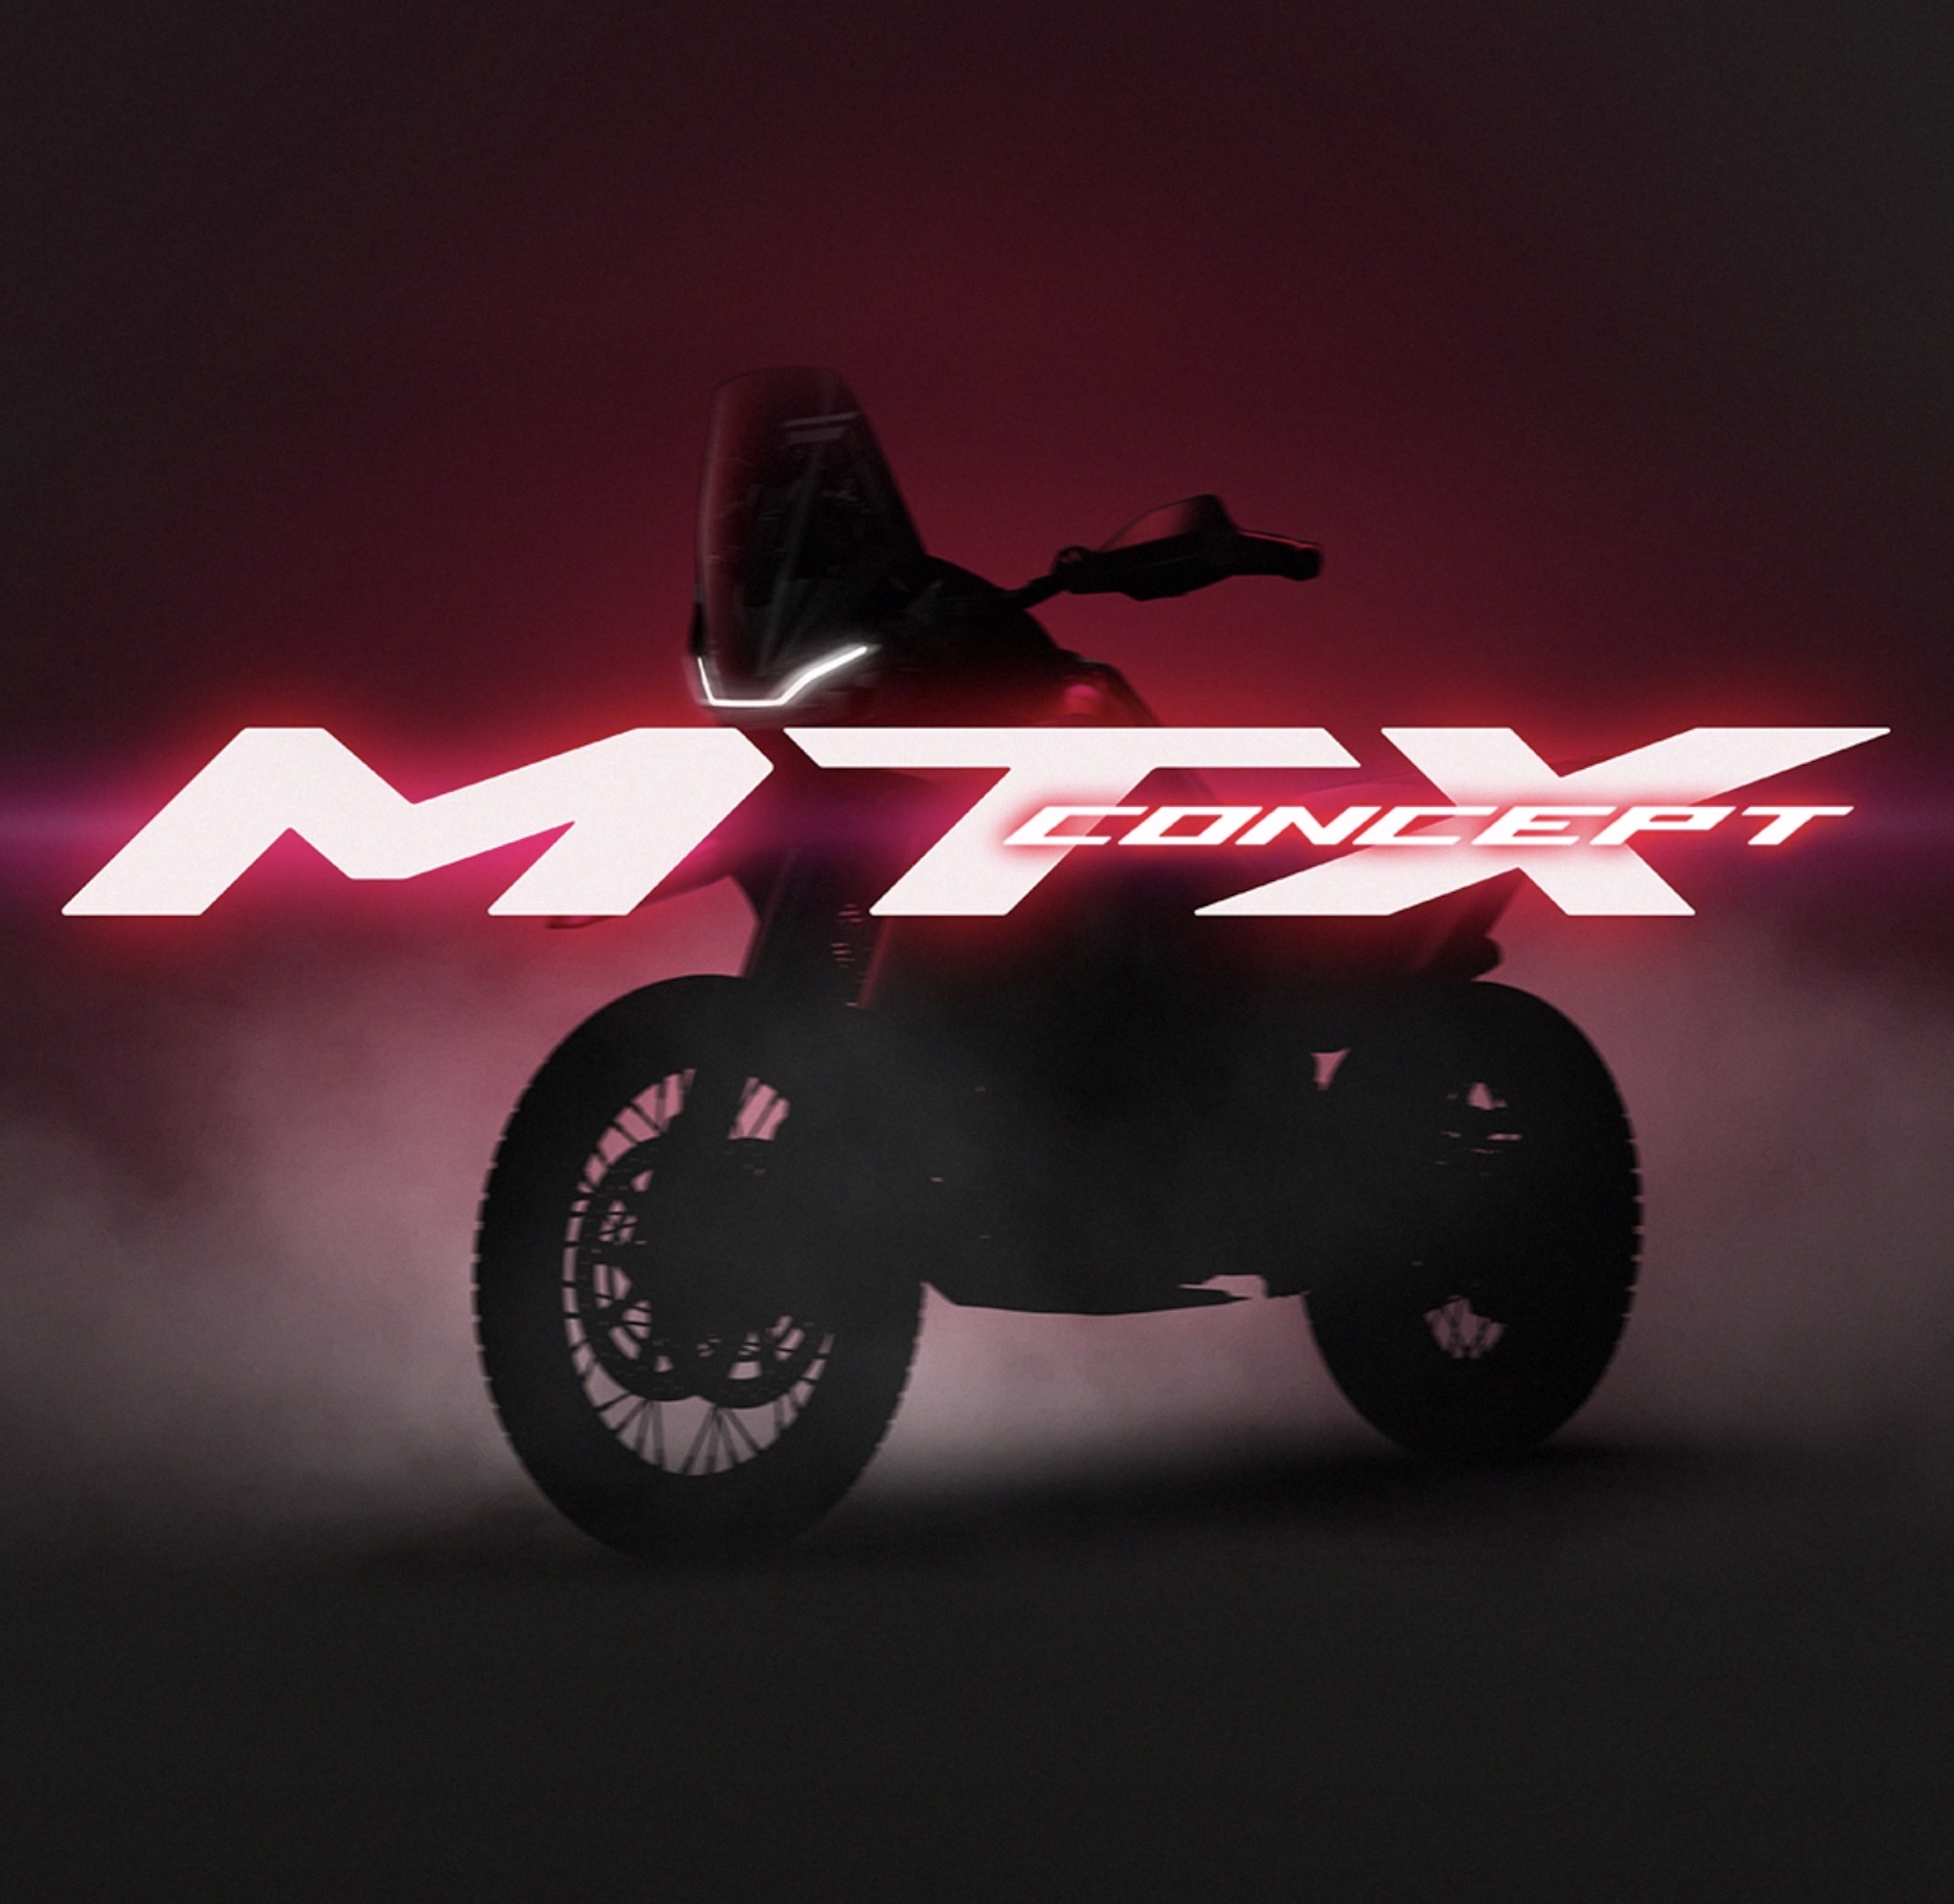 A view of CFMoto's MT-X concept. Media sourced from CFMoto's Instagram account.